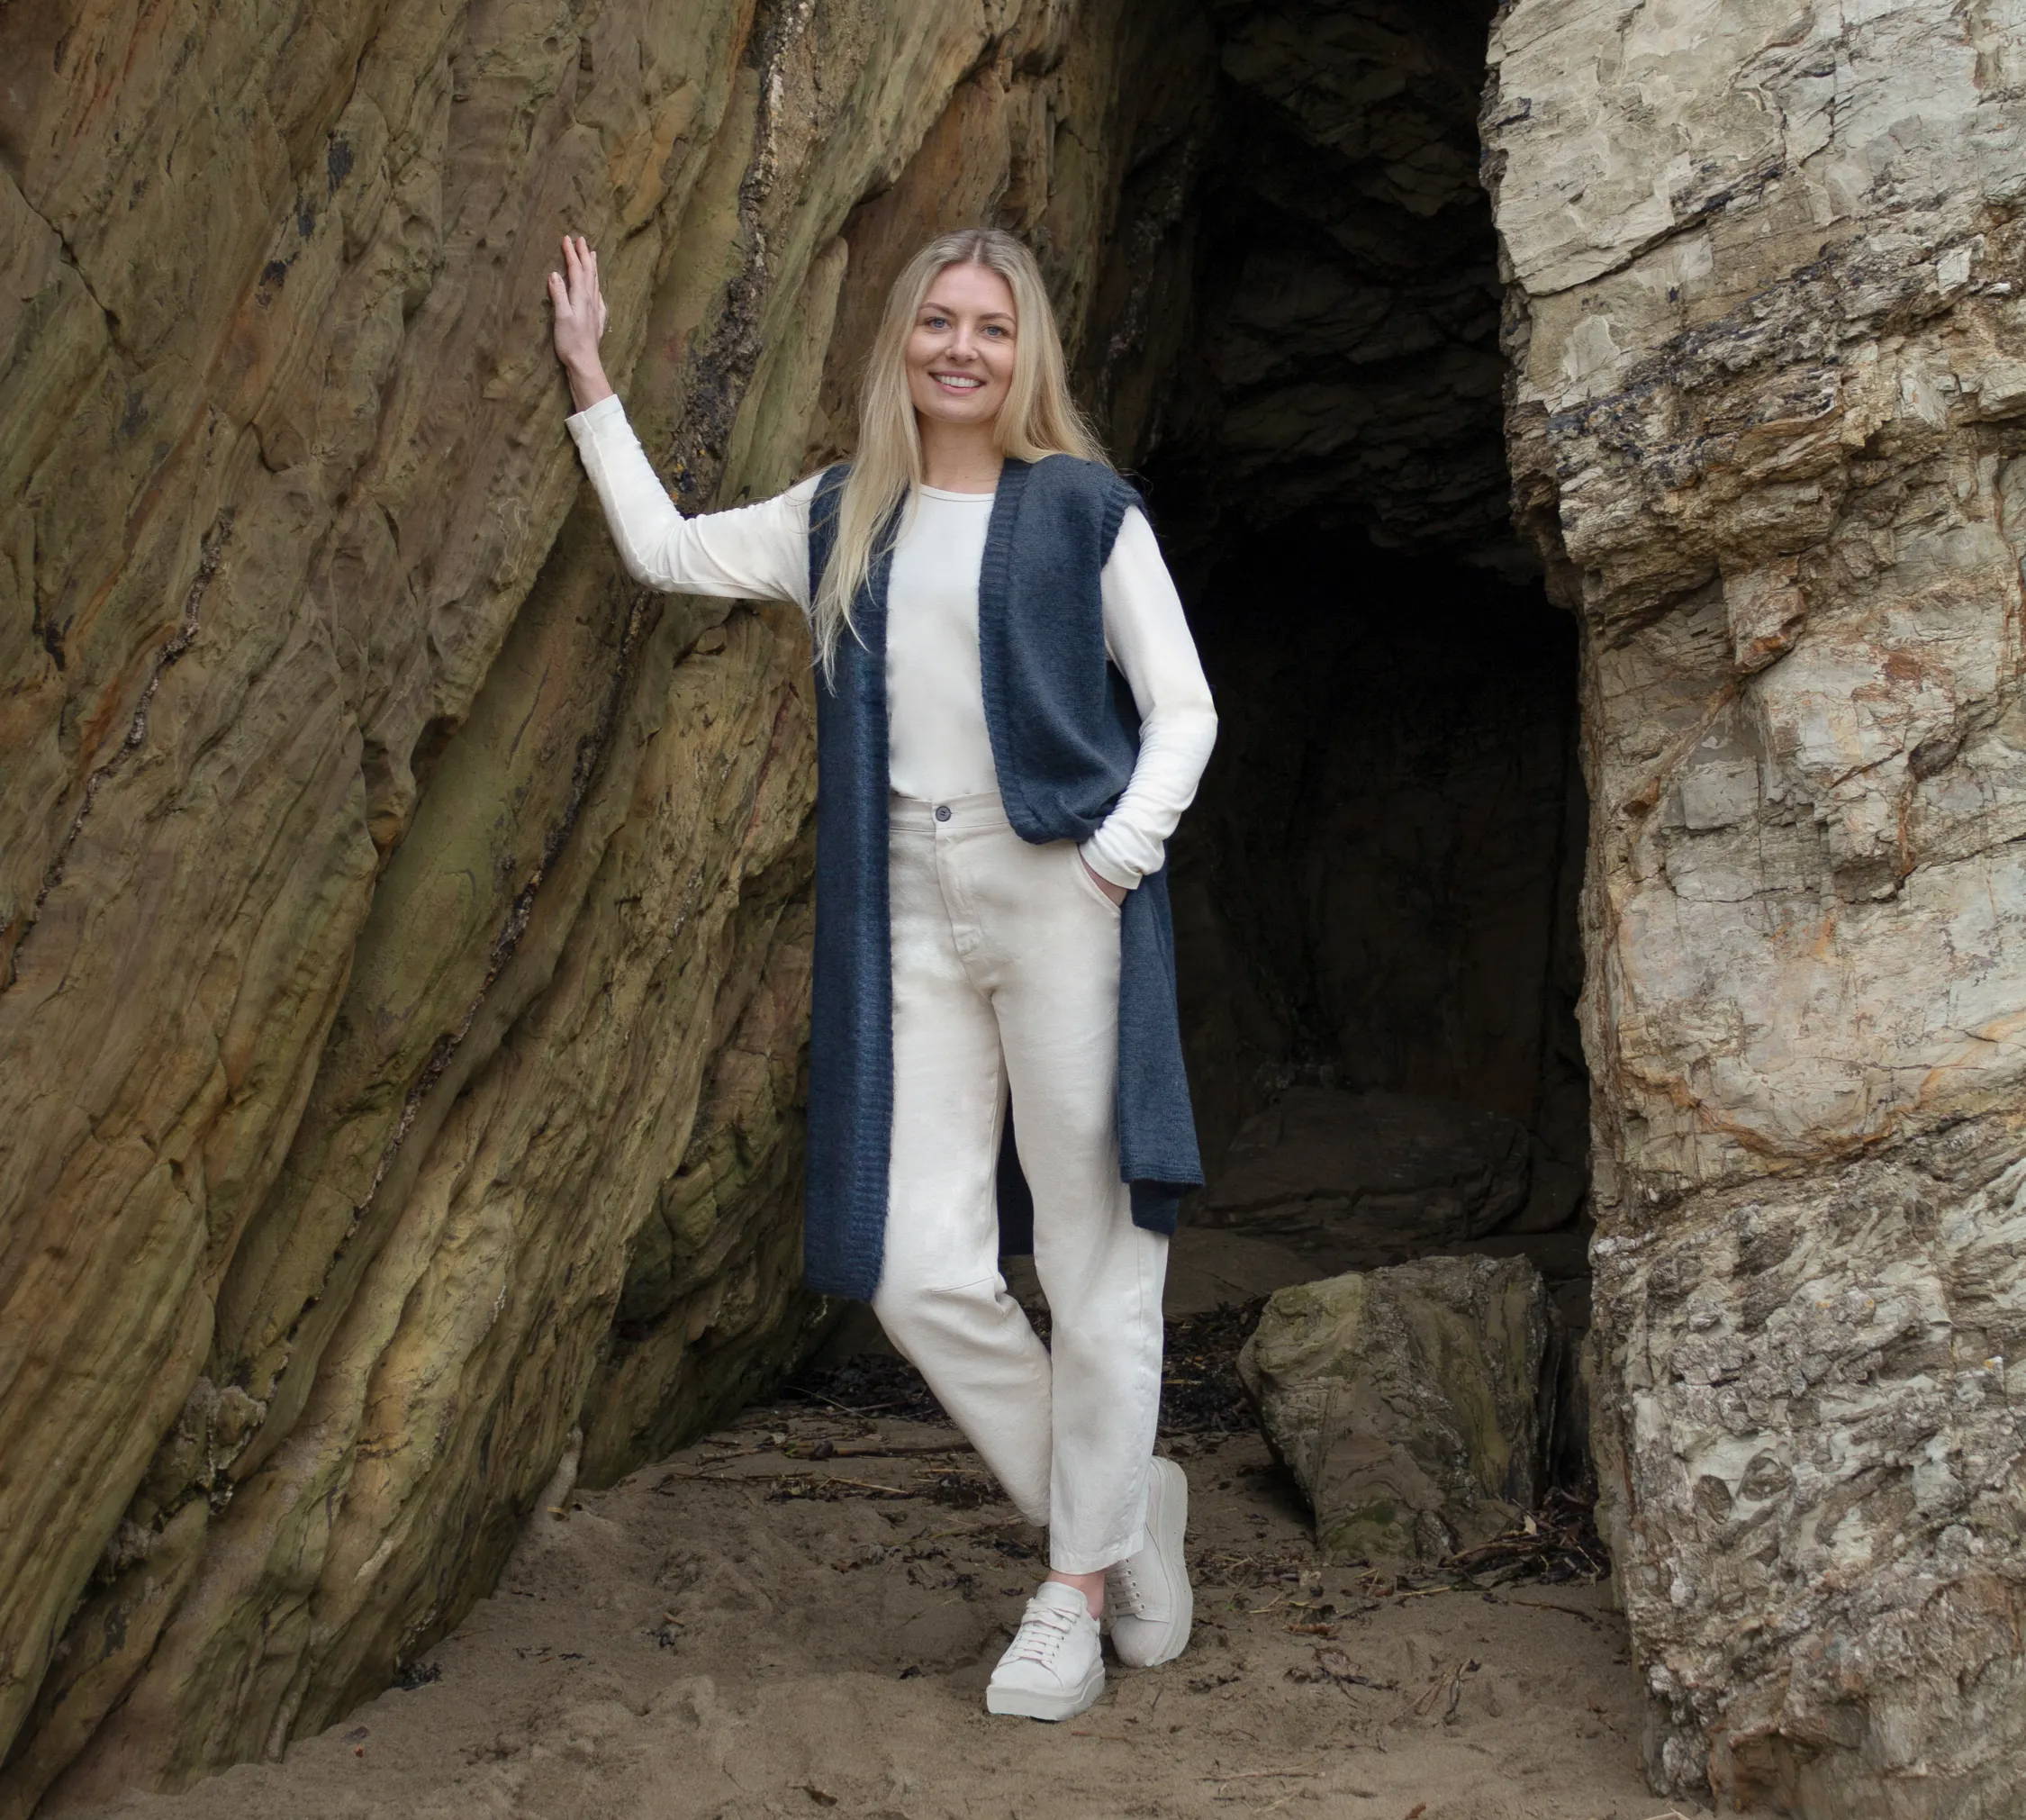 A model on a beach wearing a white long sleeved top, beige trousers, beige trainers and a long blue knitted sleeveless cardigan